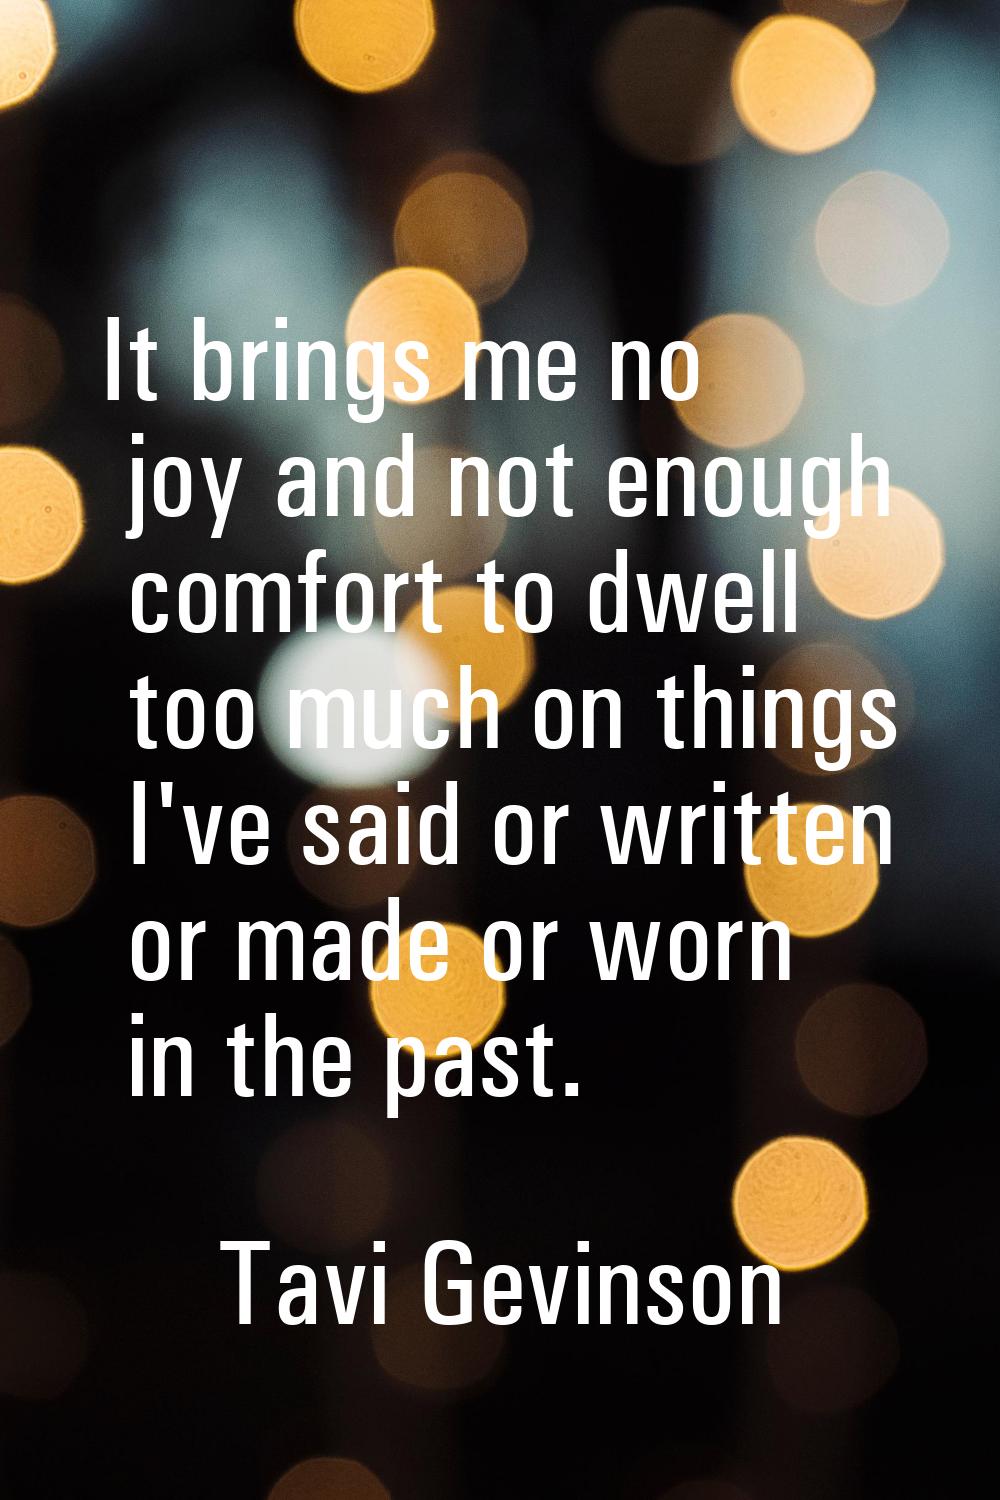 It brings me no joy and not enough comfort to dwell too much on things I've said or written or made